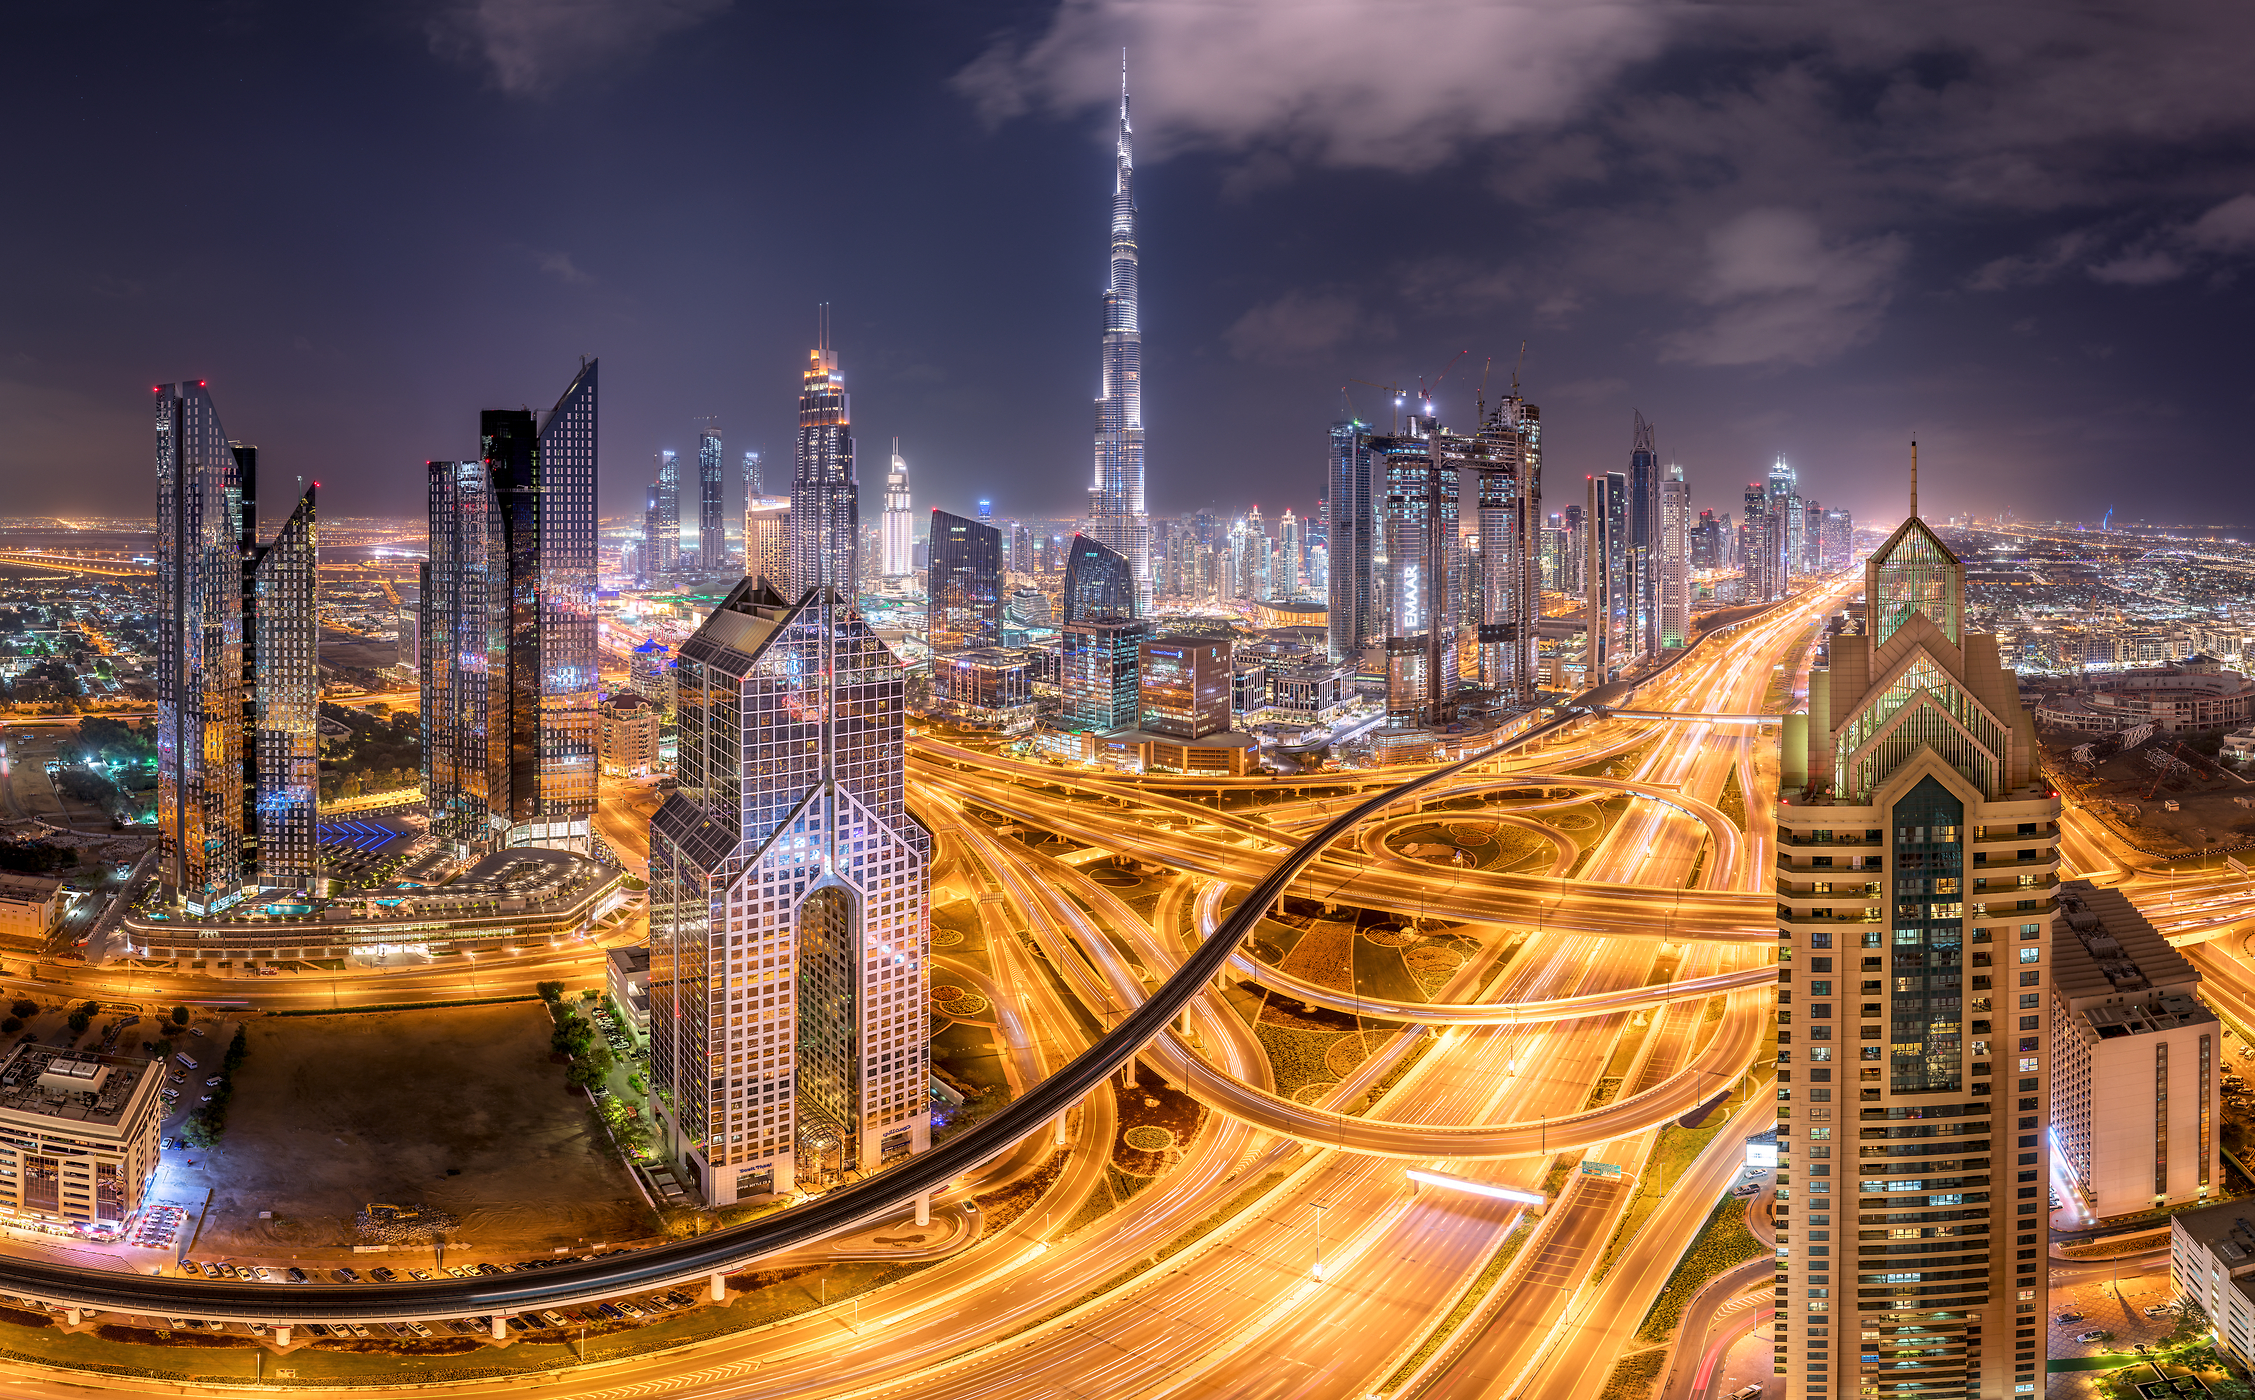 505 megapixels! A very high resolution, large-format VAST photo of the Dubai skyline and roads at night with the Burj Khalifa; fine art cityscape photograph created by Tim Shields in the United Arab Emirates.